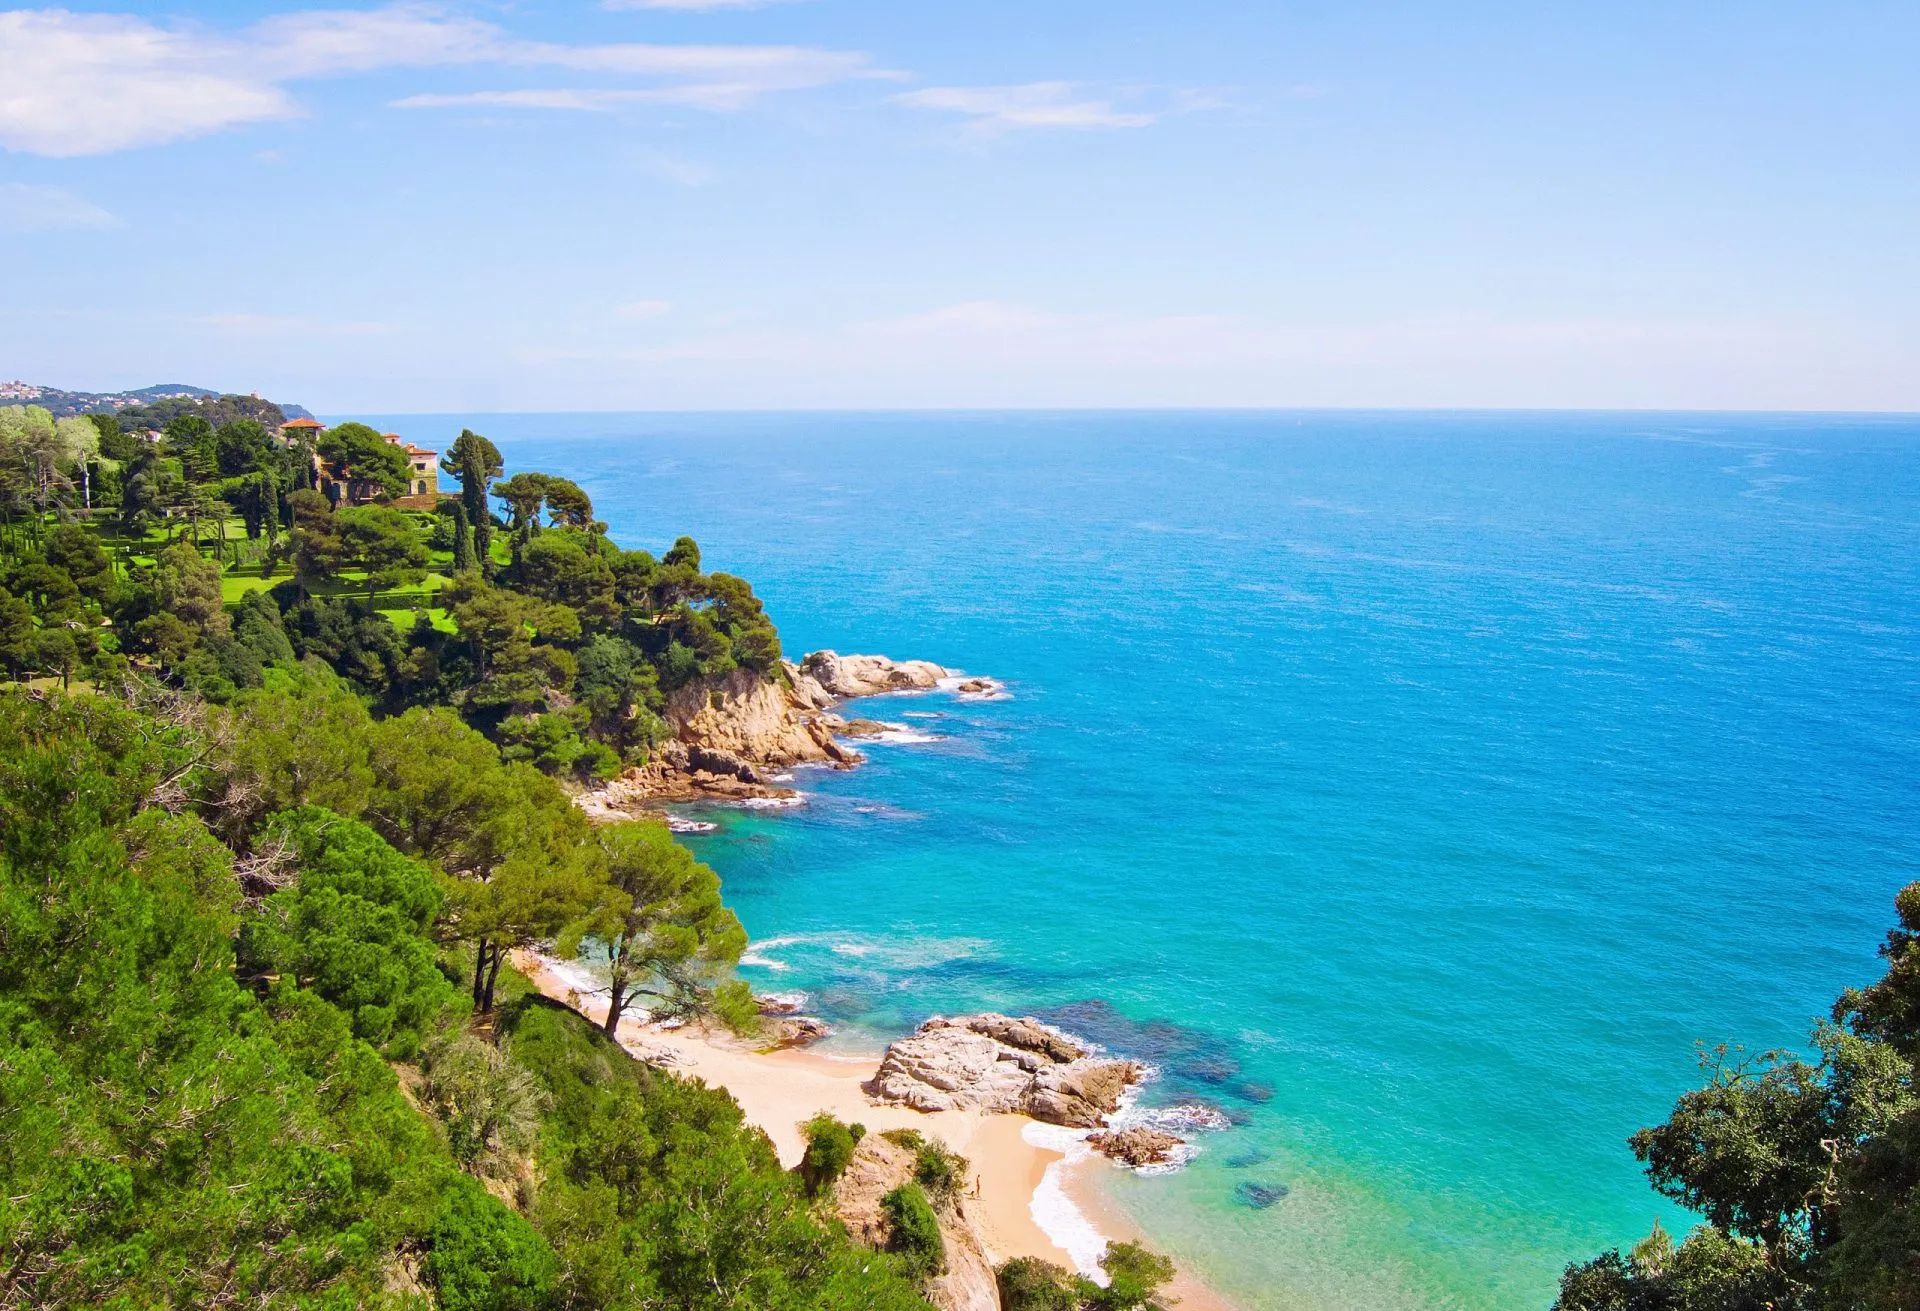 Seafront of lloret de mar spain stockpack adobe stock scaled